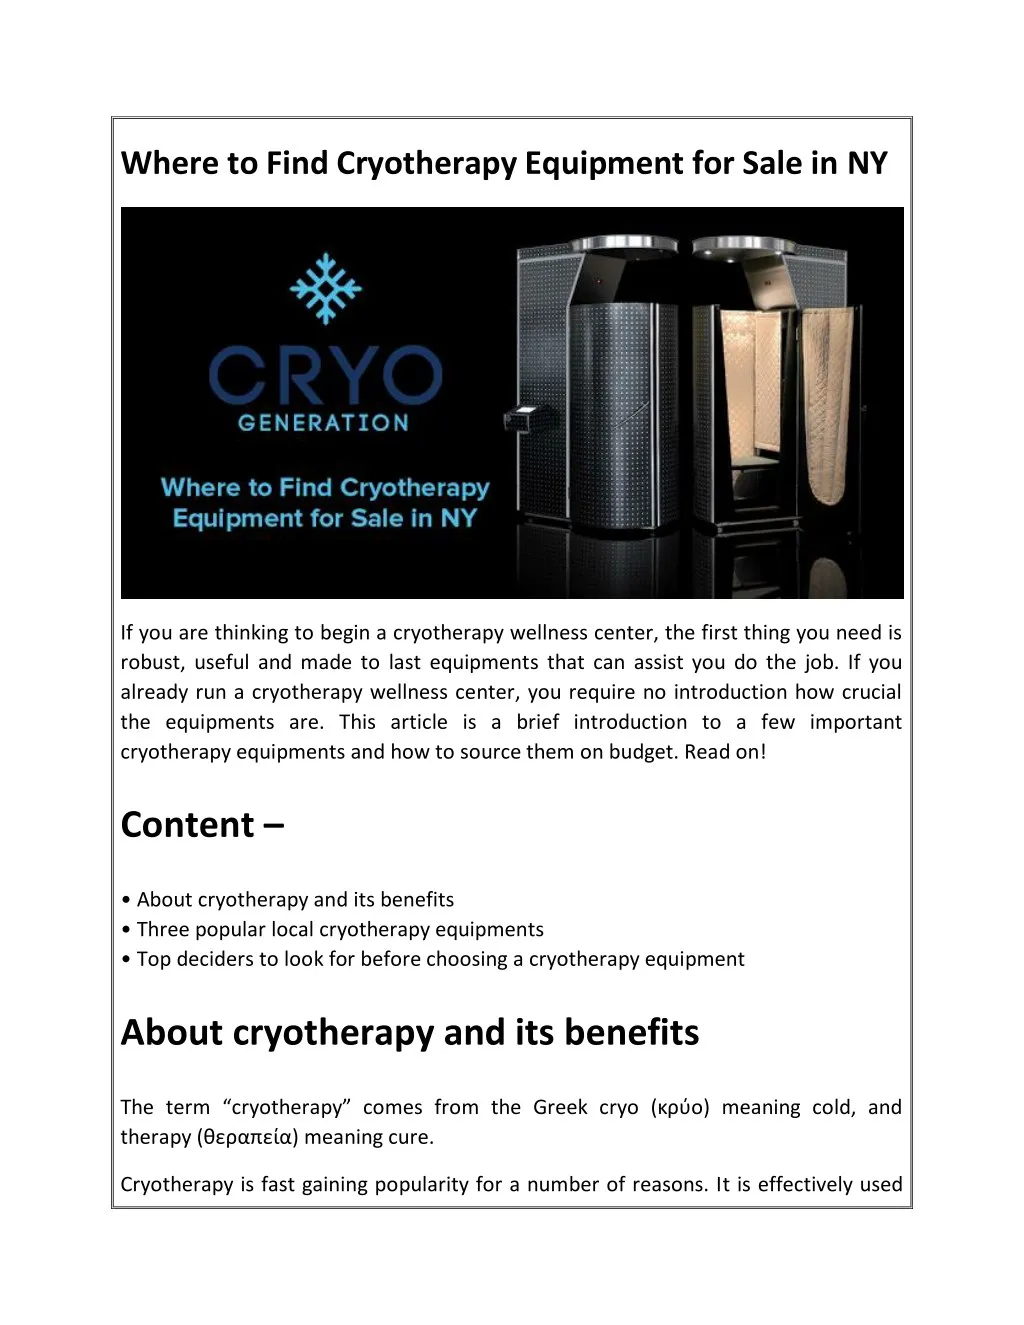 where to find cryotherapy equipment for sale in ny